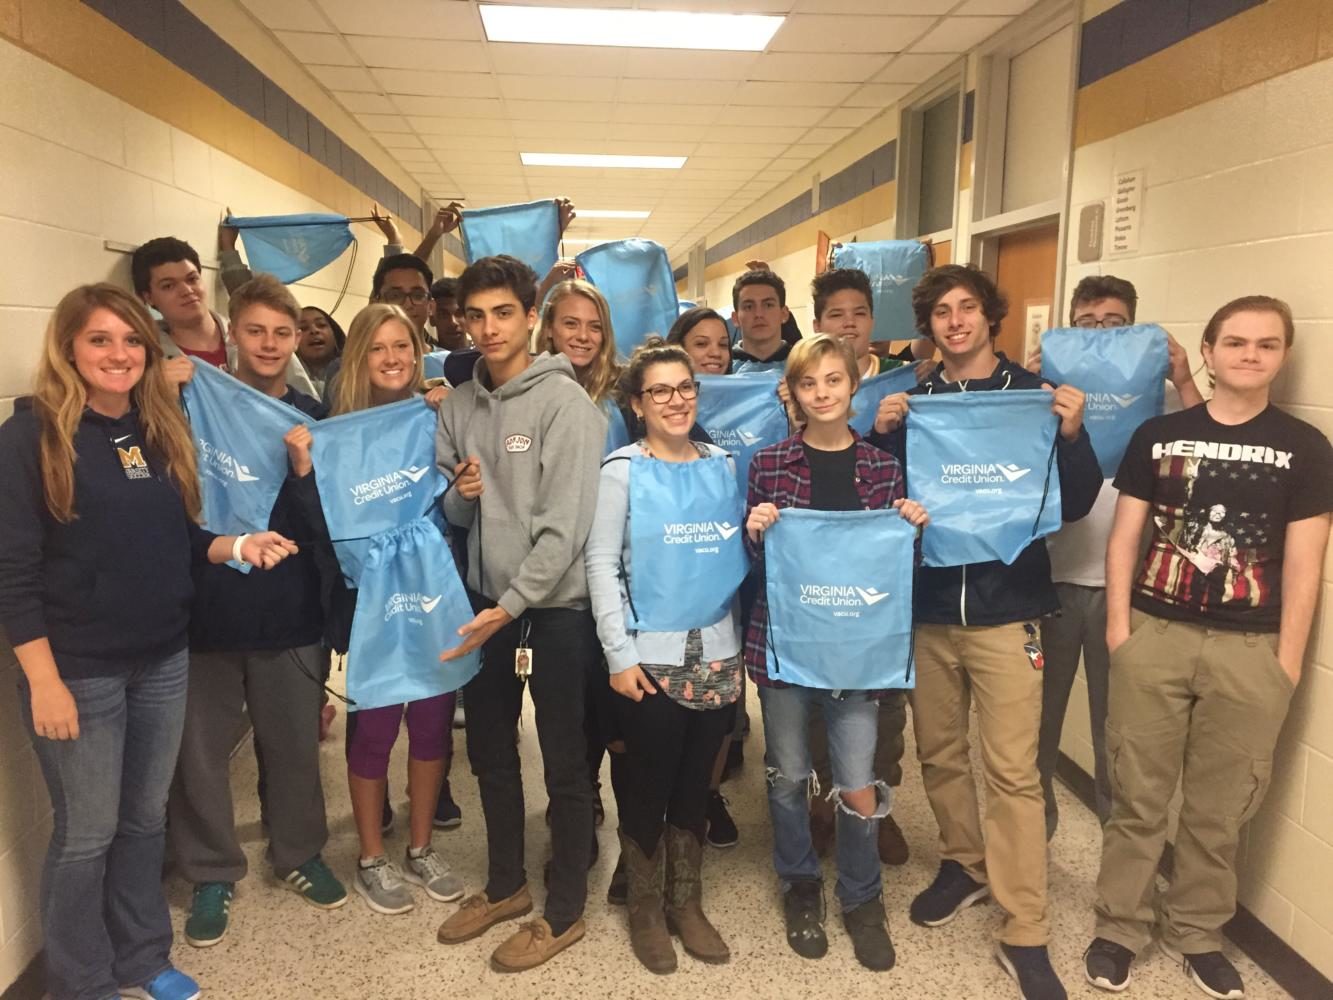 Ms.+Kramers+class+shows+off+their+drawstring+bags+from+Virginia+Credit+Union.